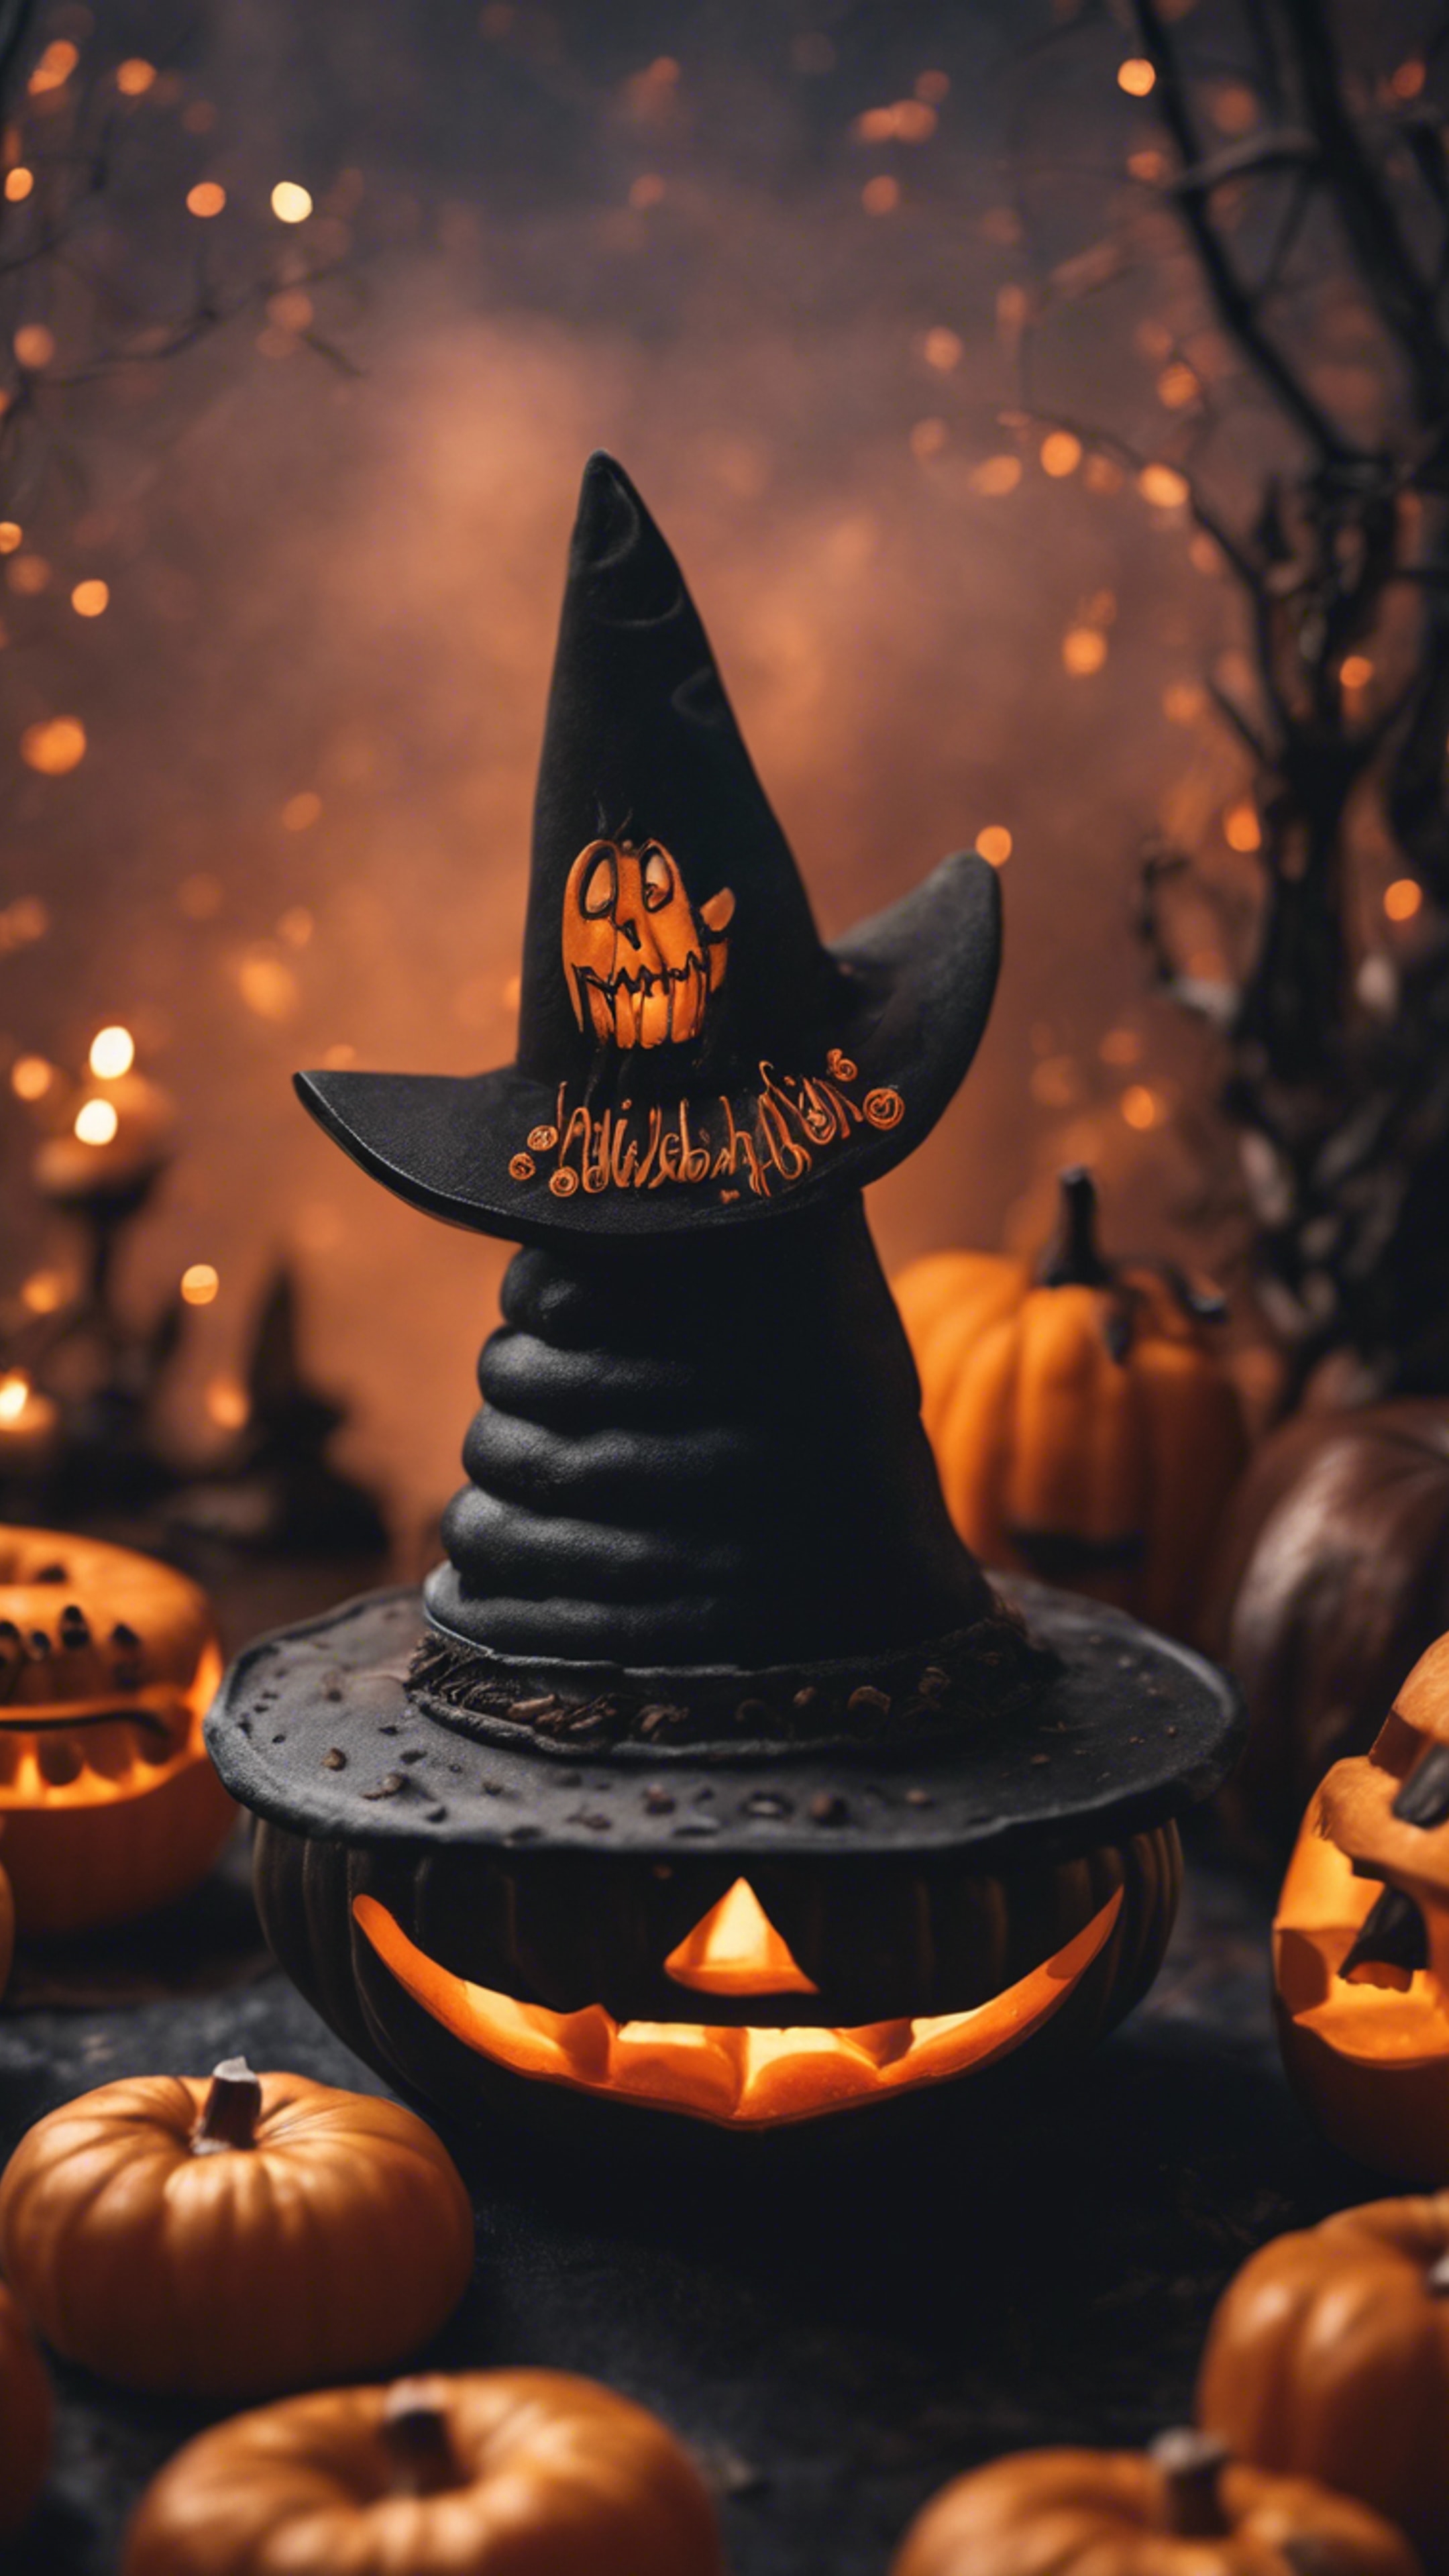 A spooky scene with jack-o-lanterns and a black witch's hat on a pumpkin-spiced donut. 벽지[393956df6a264774b0c0]